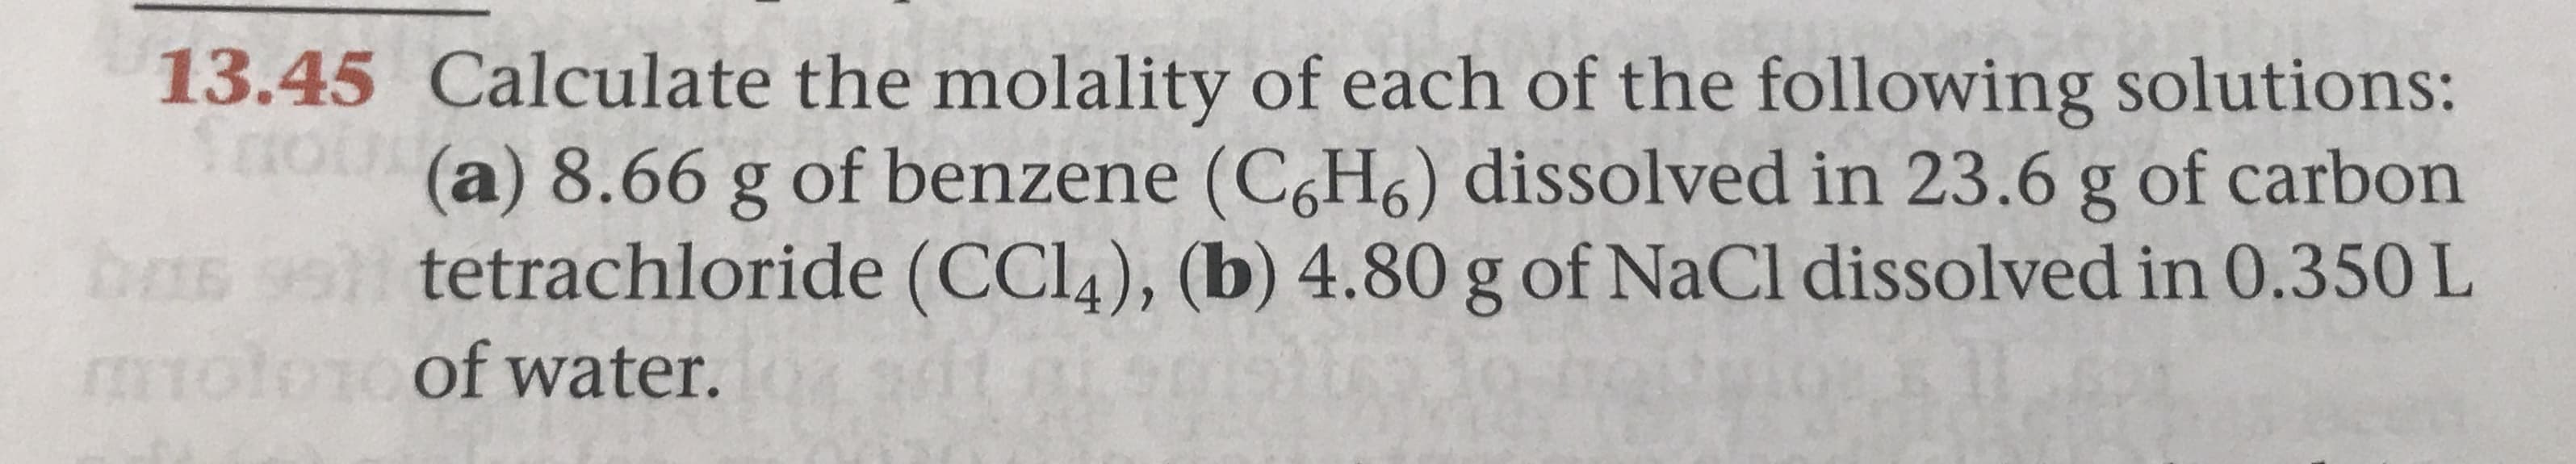 13.45 Calculate the molality of each of the following solutions:
(a) 8.66 g of benzene (C6H6) dissolved in 23.6 g of carbon
tetrachloride (CCL4), (b) 4.80 g of NaCl dissolved in 0.350 L
S
bms
tolonof water.
